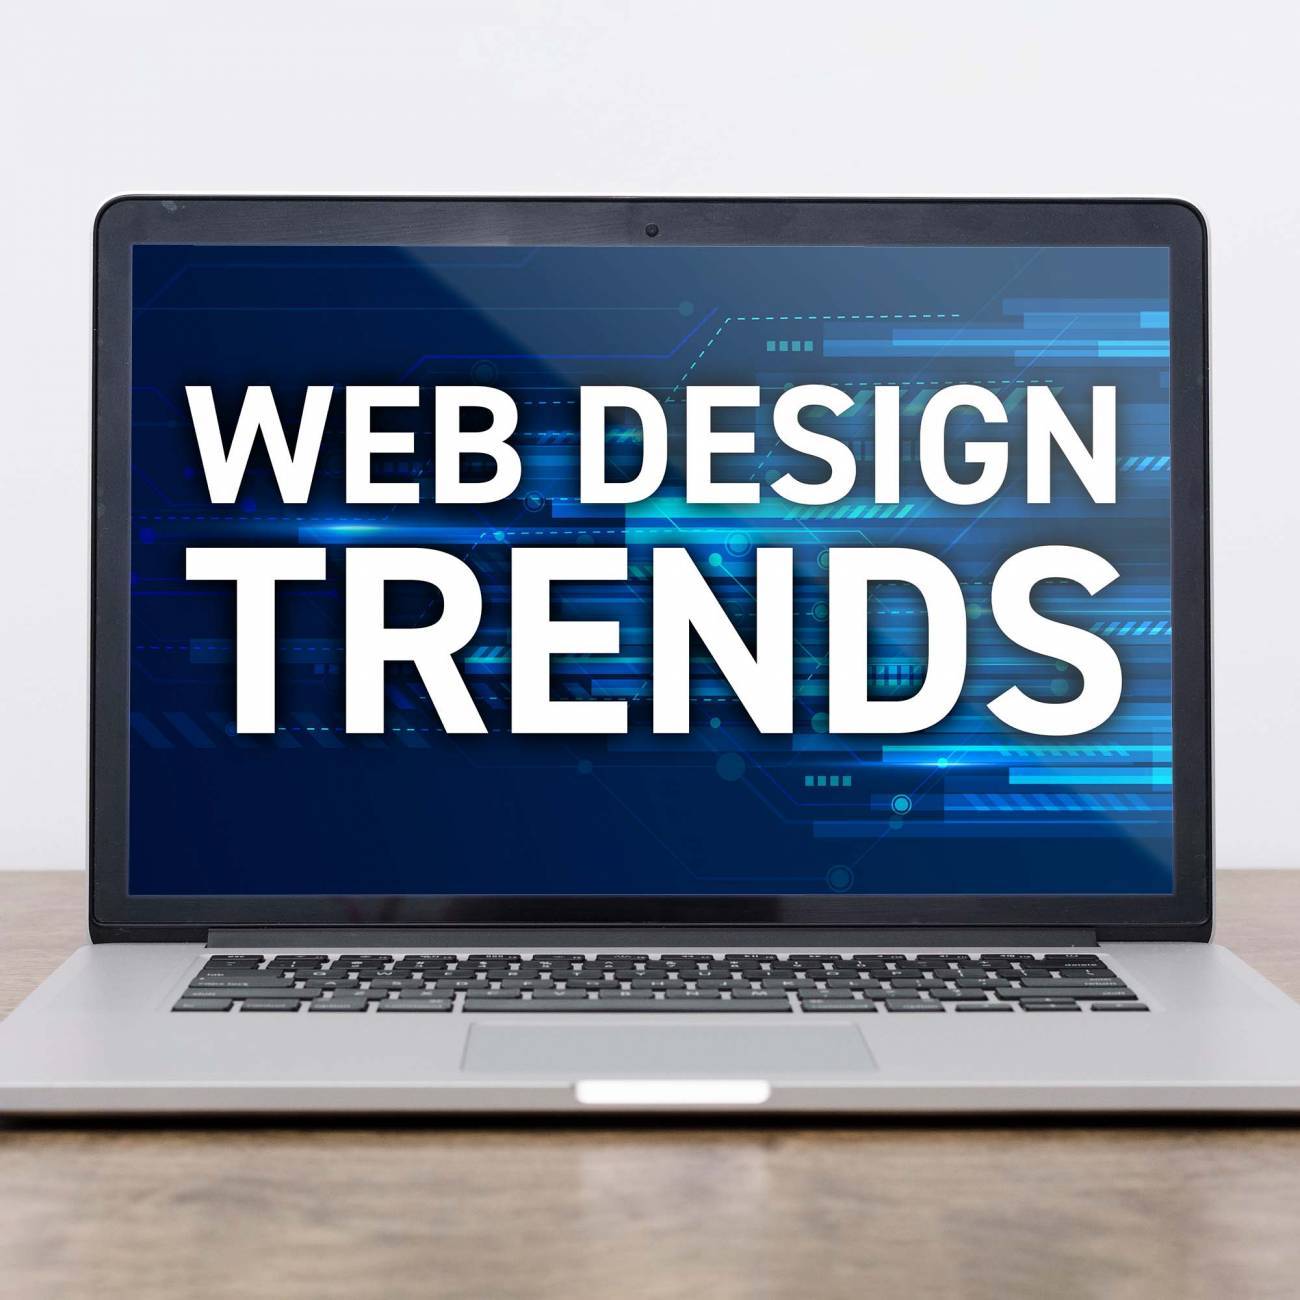 a laptop with web design trends displaying on the screen